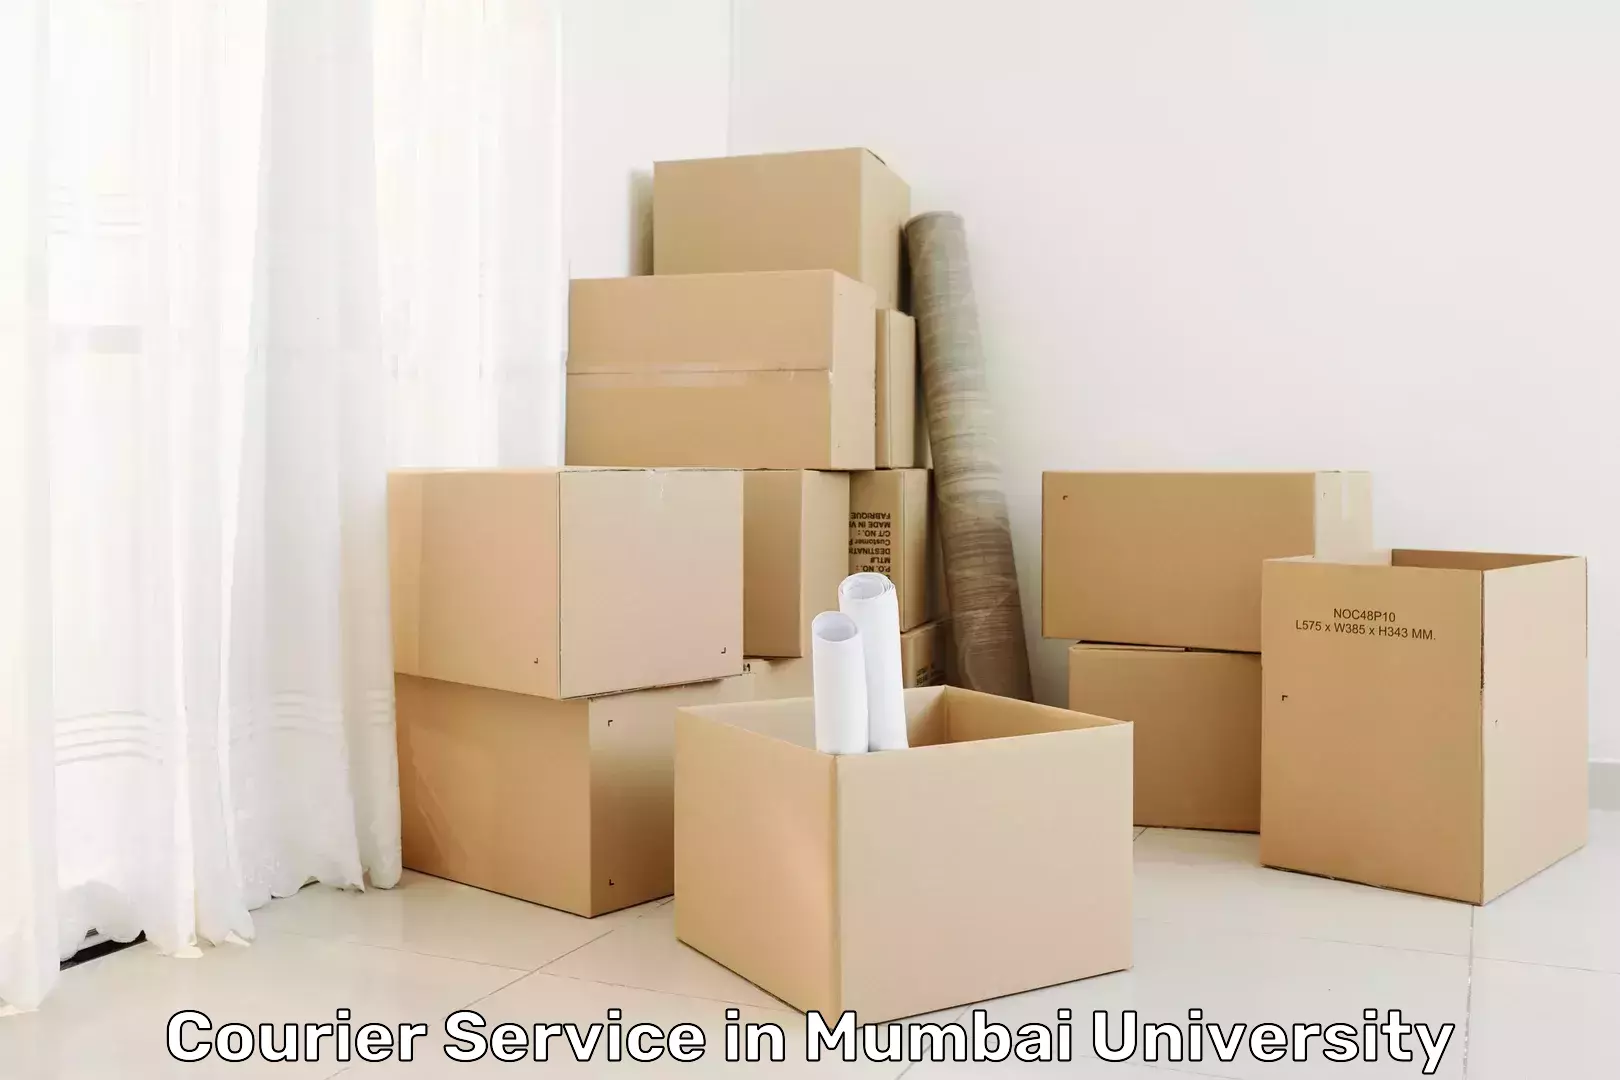 Parcel delivery automation in Mumbai University